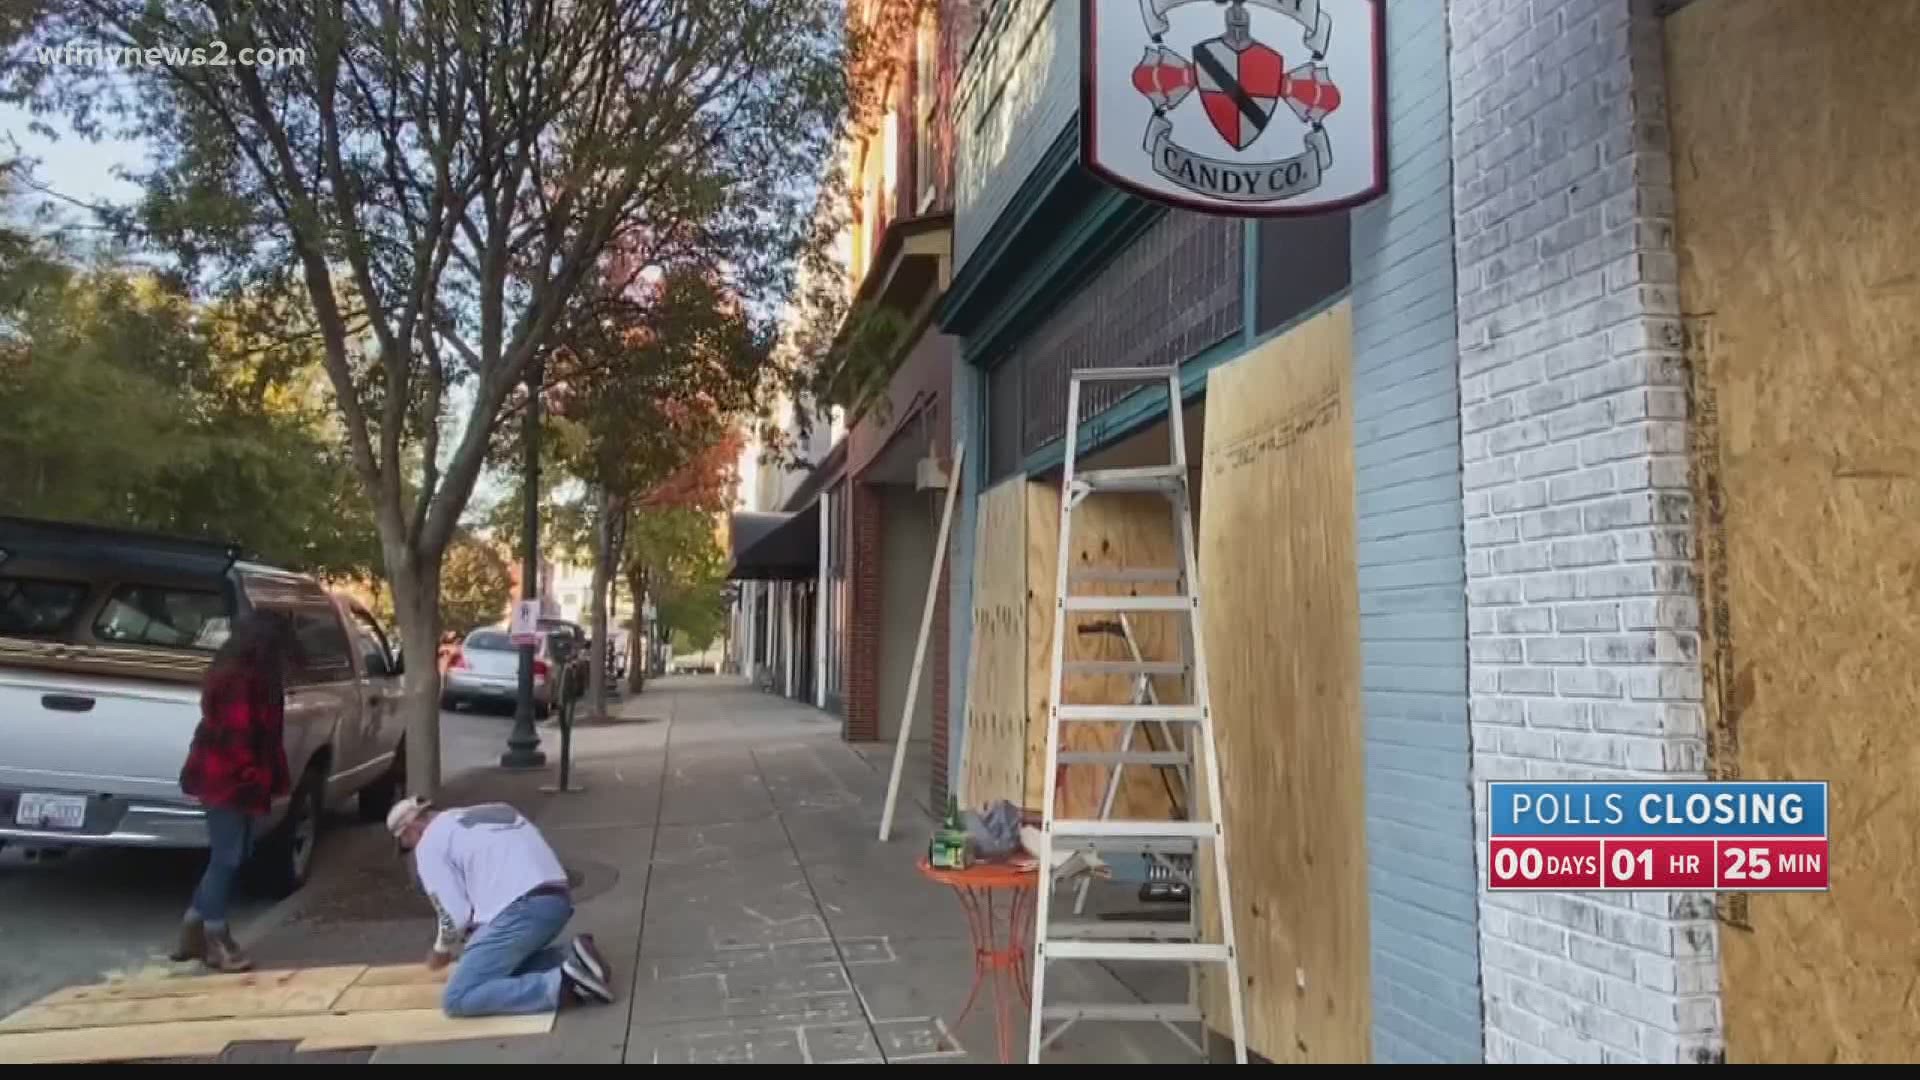 Several businesses boarded up their windows before polls closed on election night. One business owner said it’s a precaution after the George Floyd riots in May.